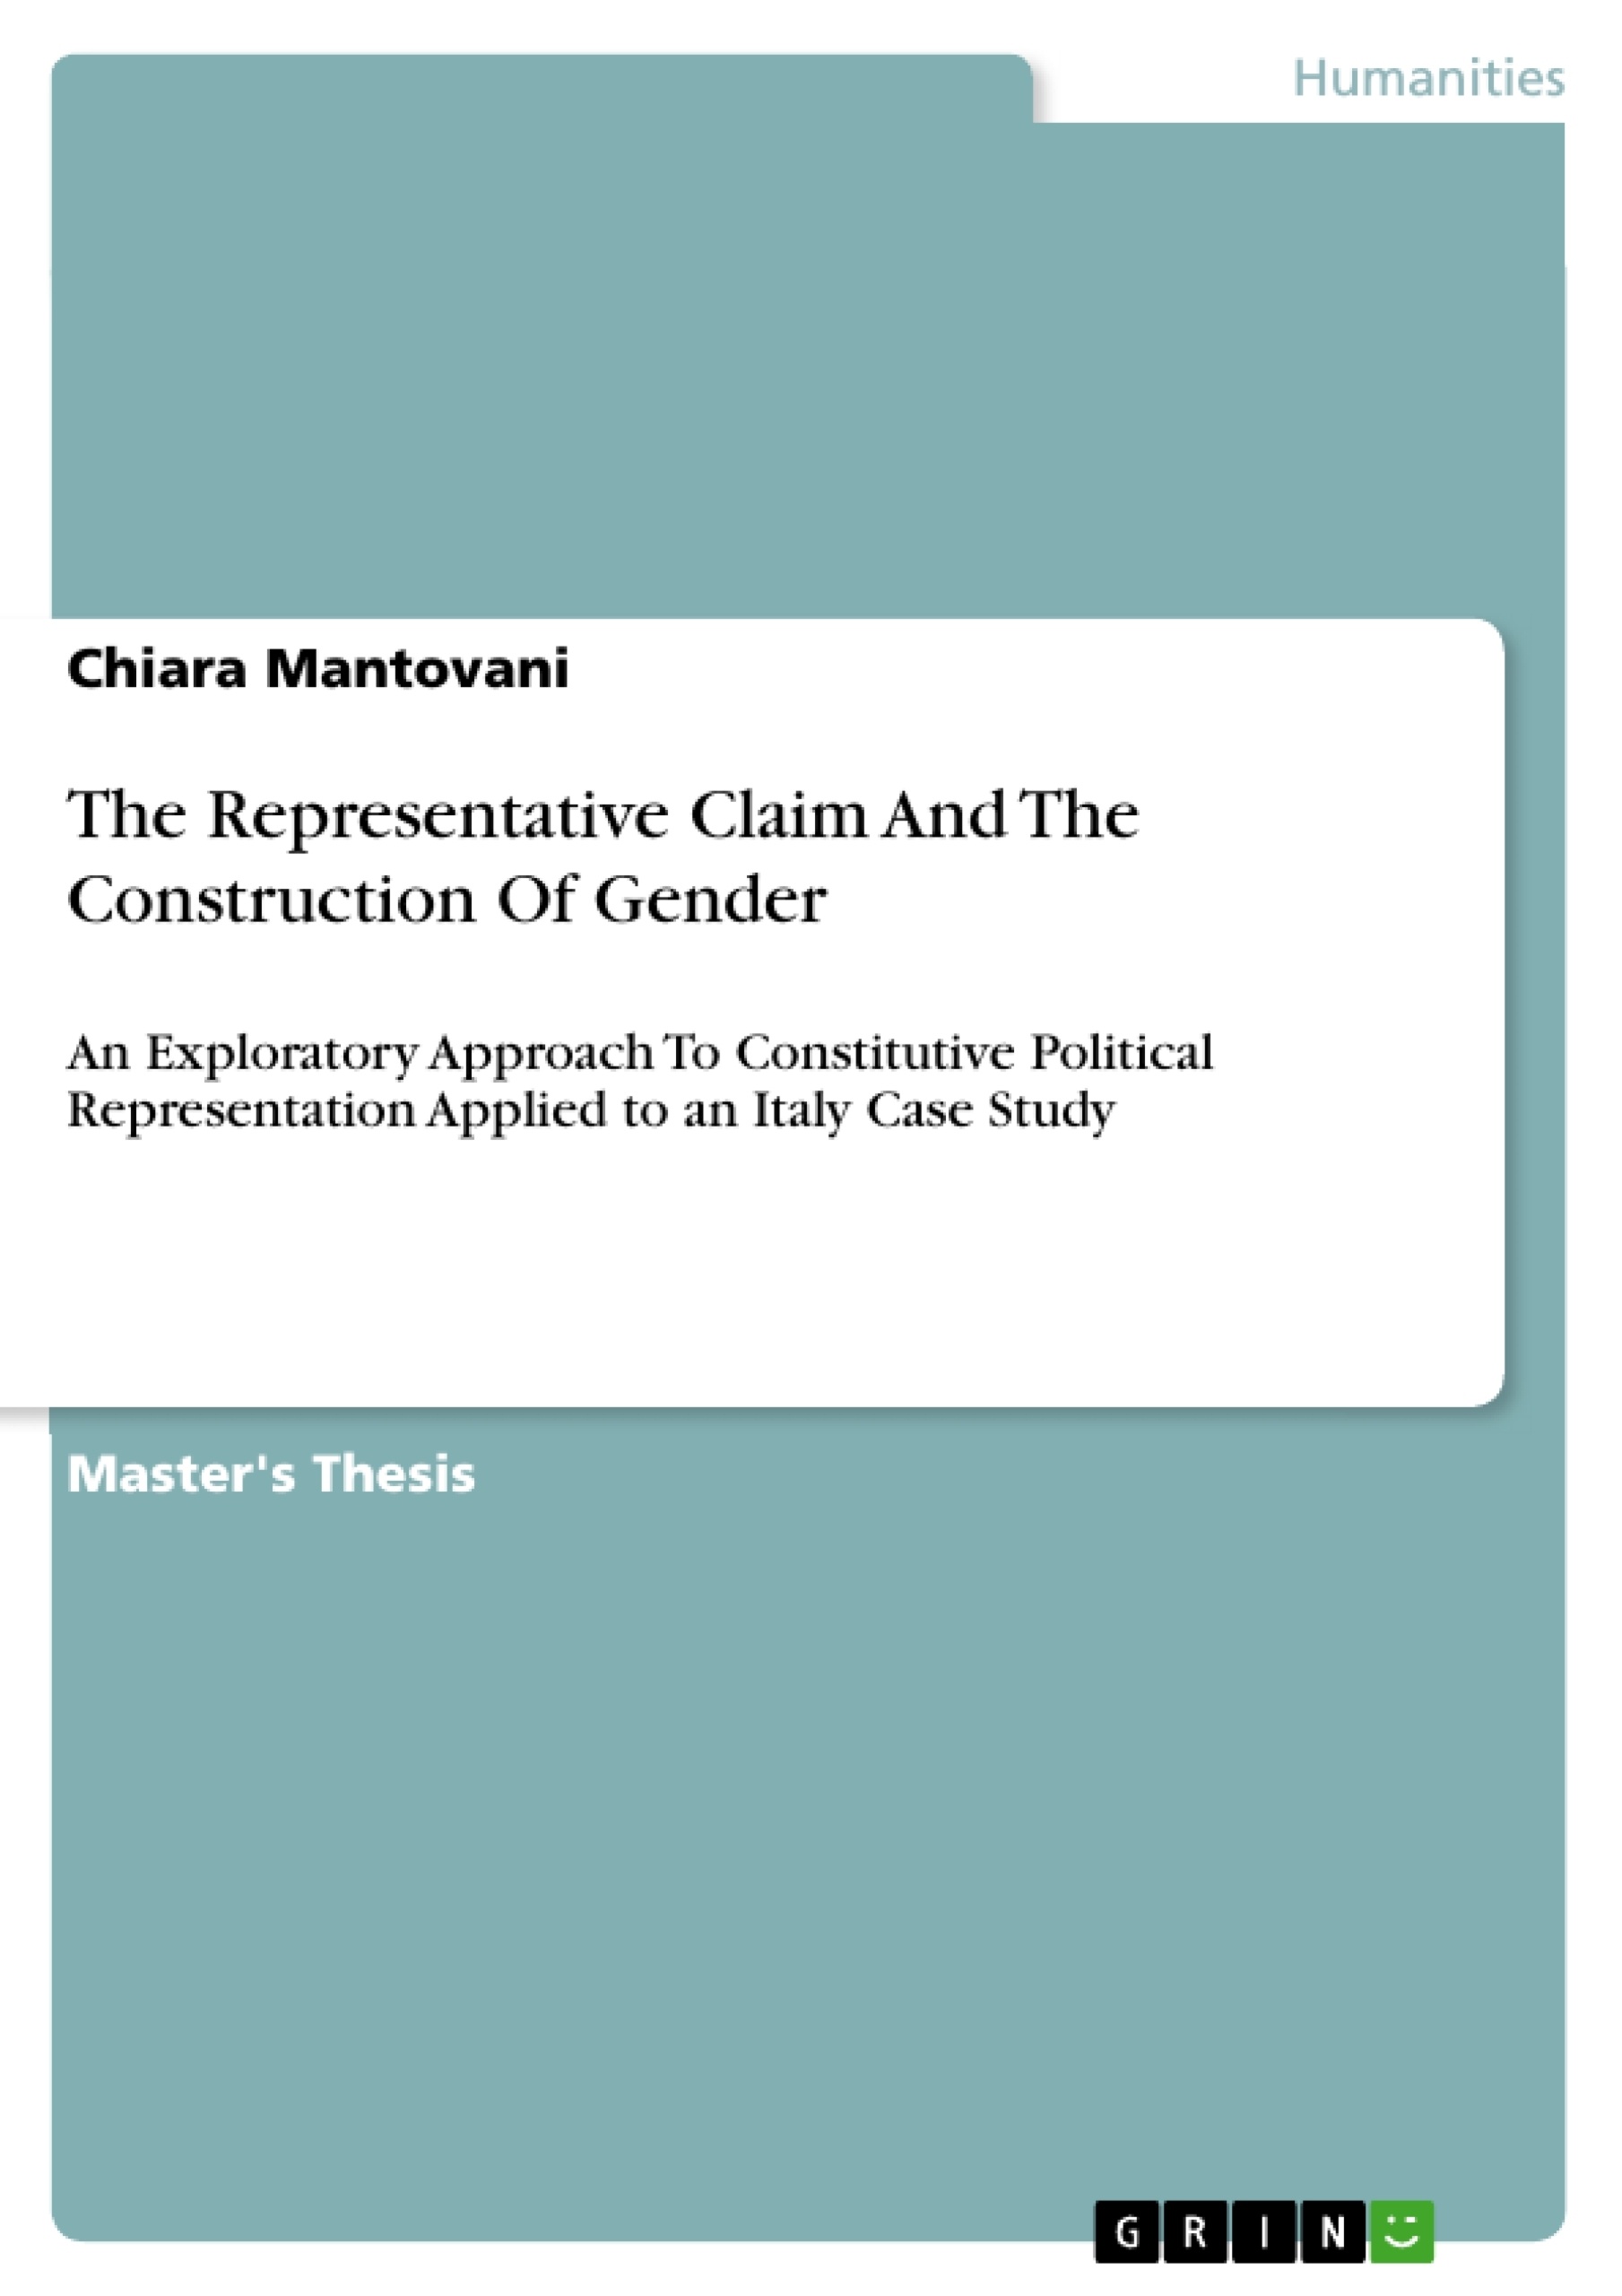 Title: The Representative Claim And The Construction Of Gender